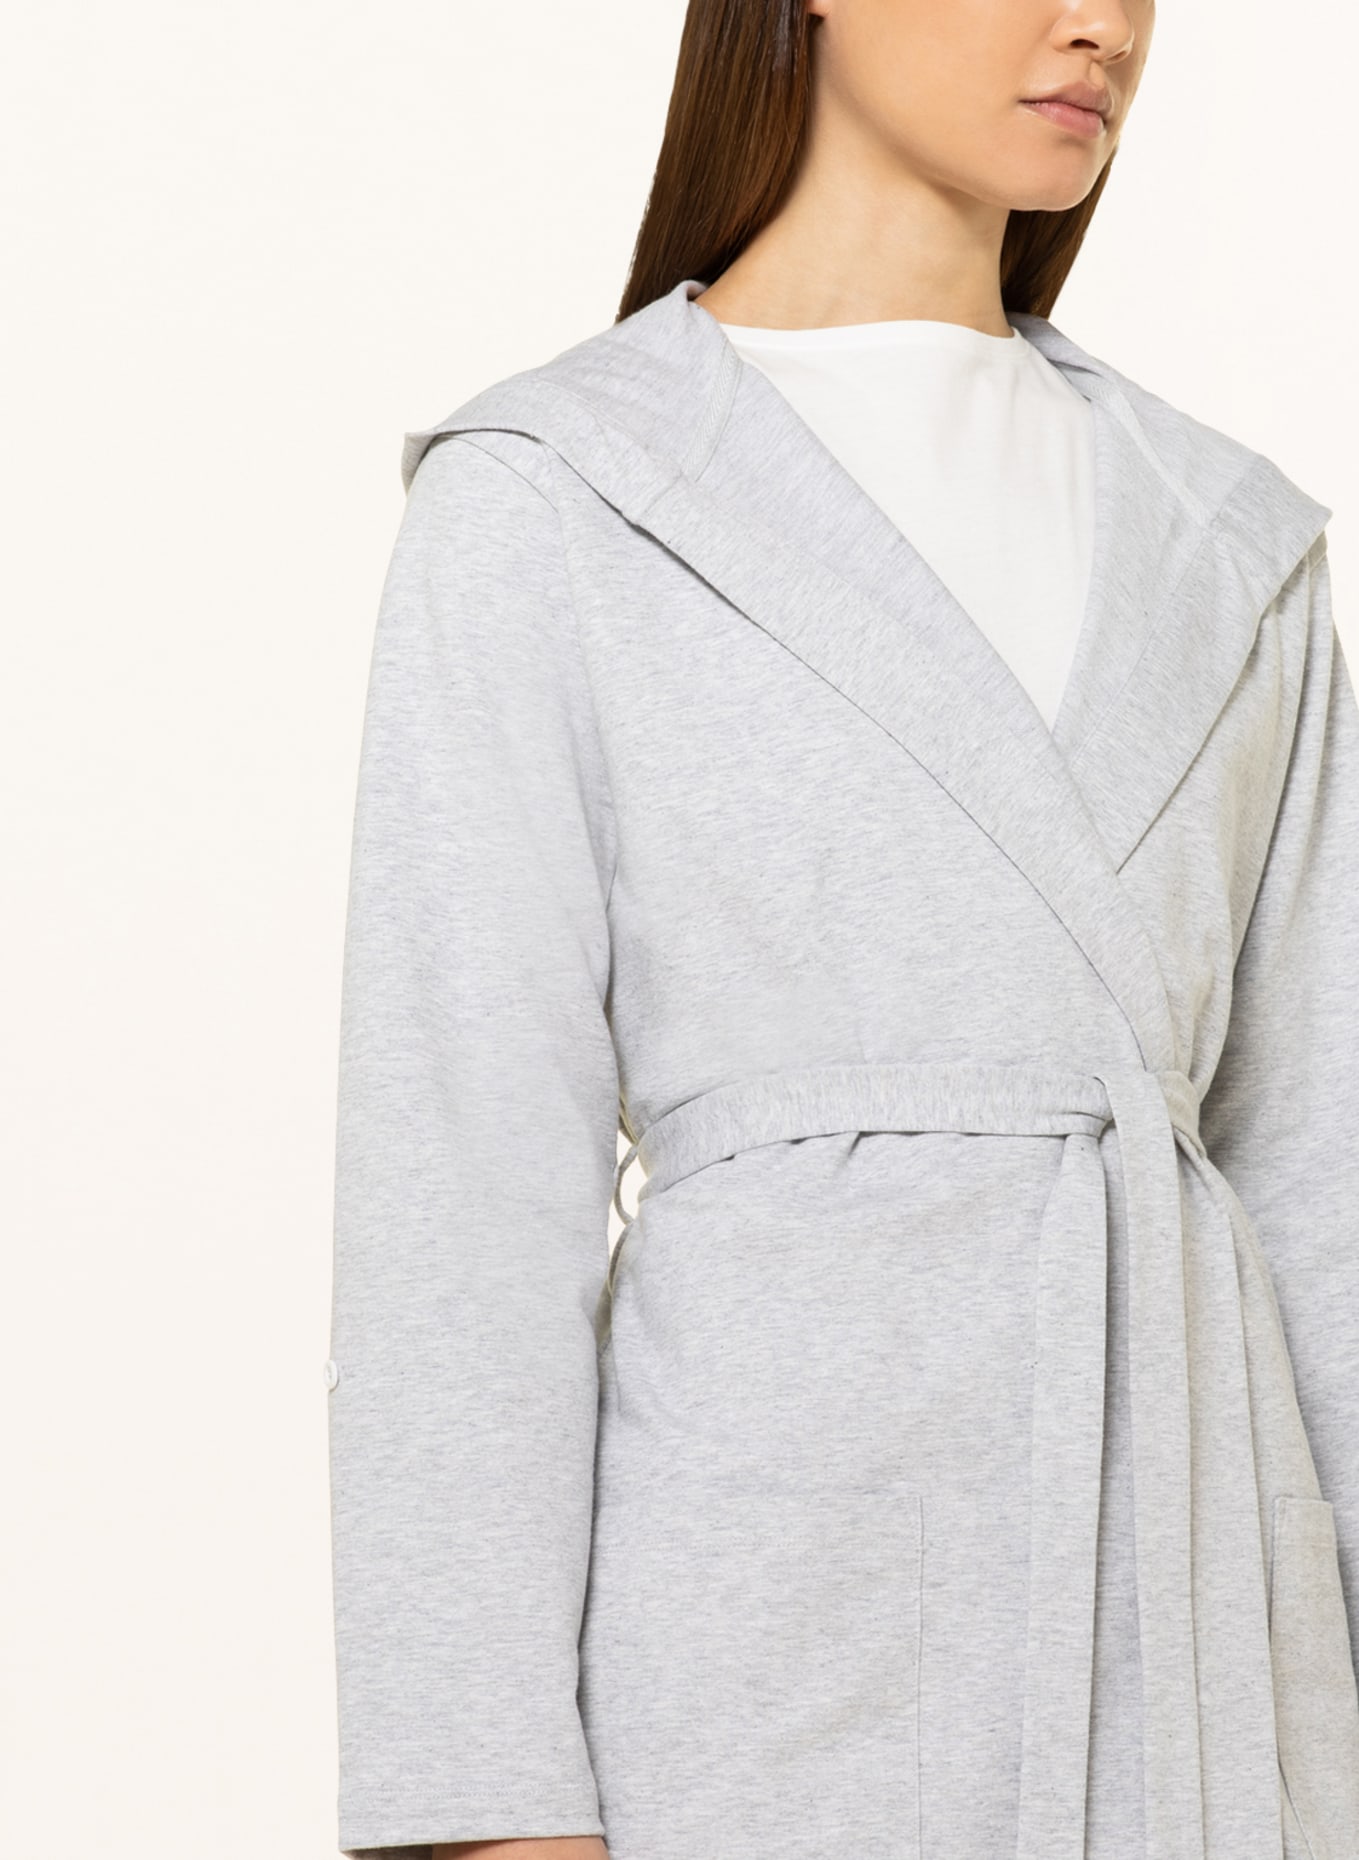 Skiny Women’s bathrobe EVERY NIGHT IN MIX & MATCH, Color: LIGHT GRAY (Image 5)